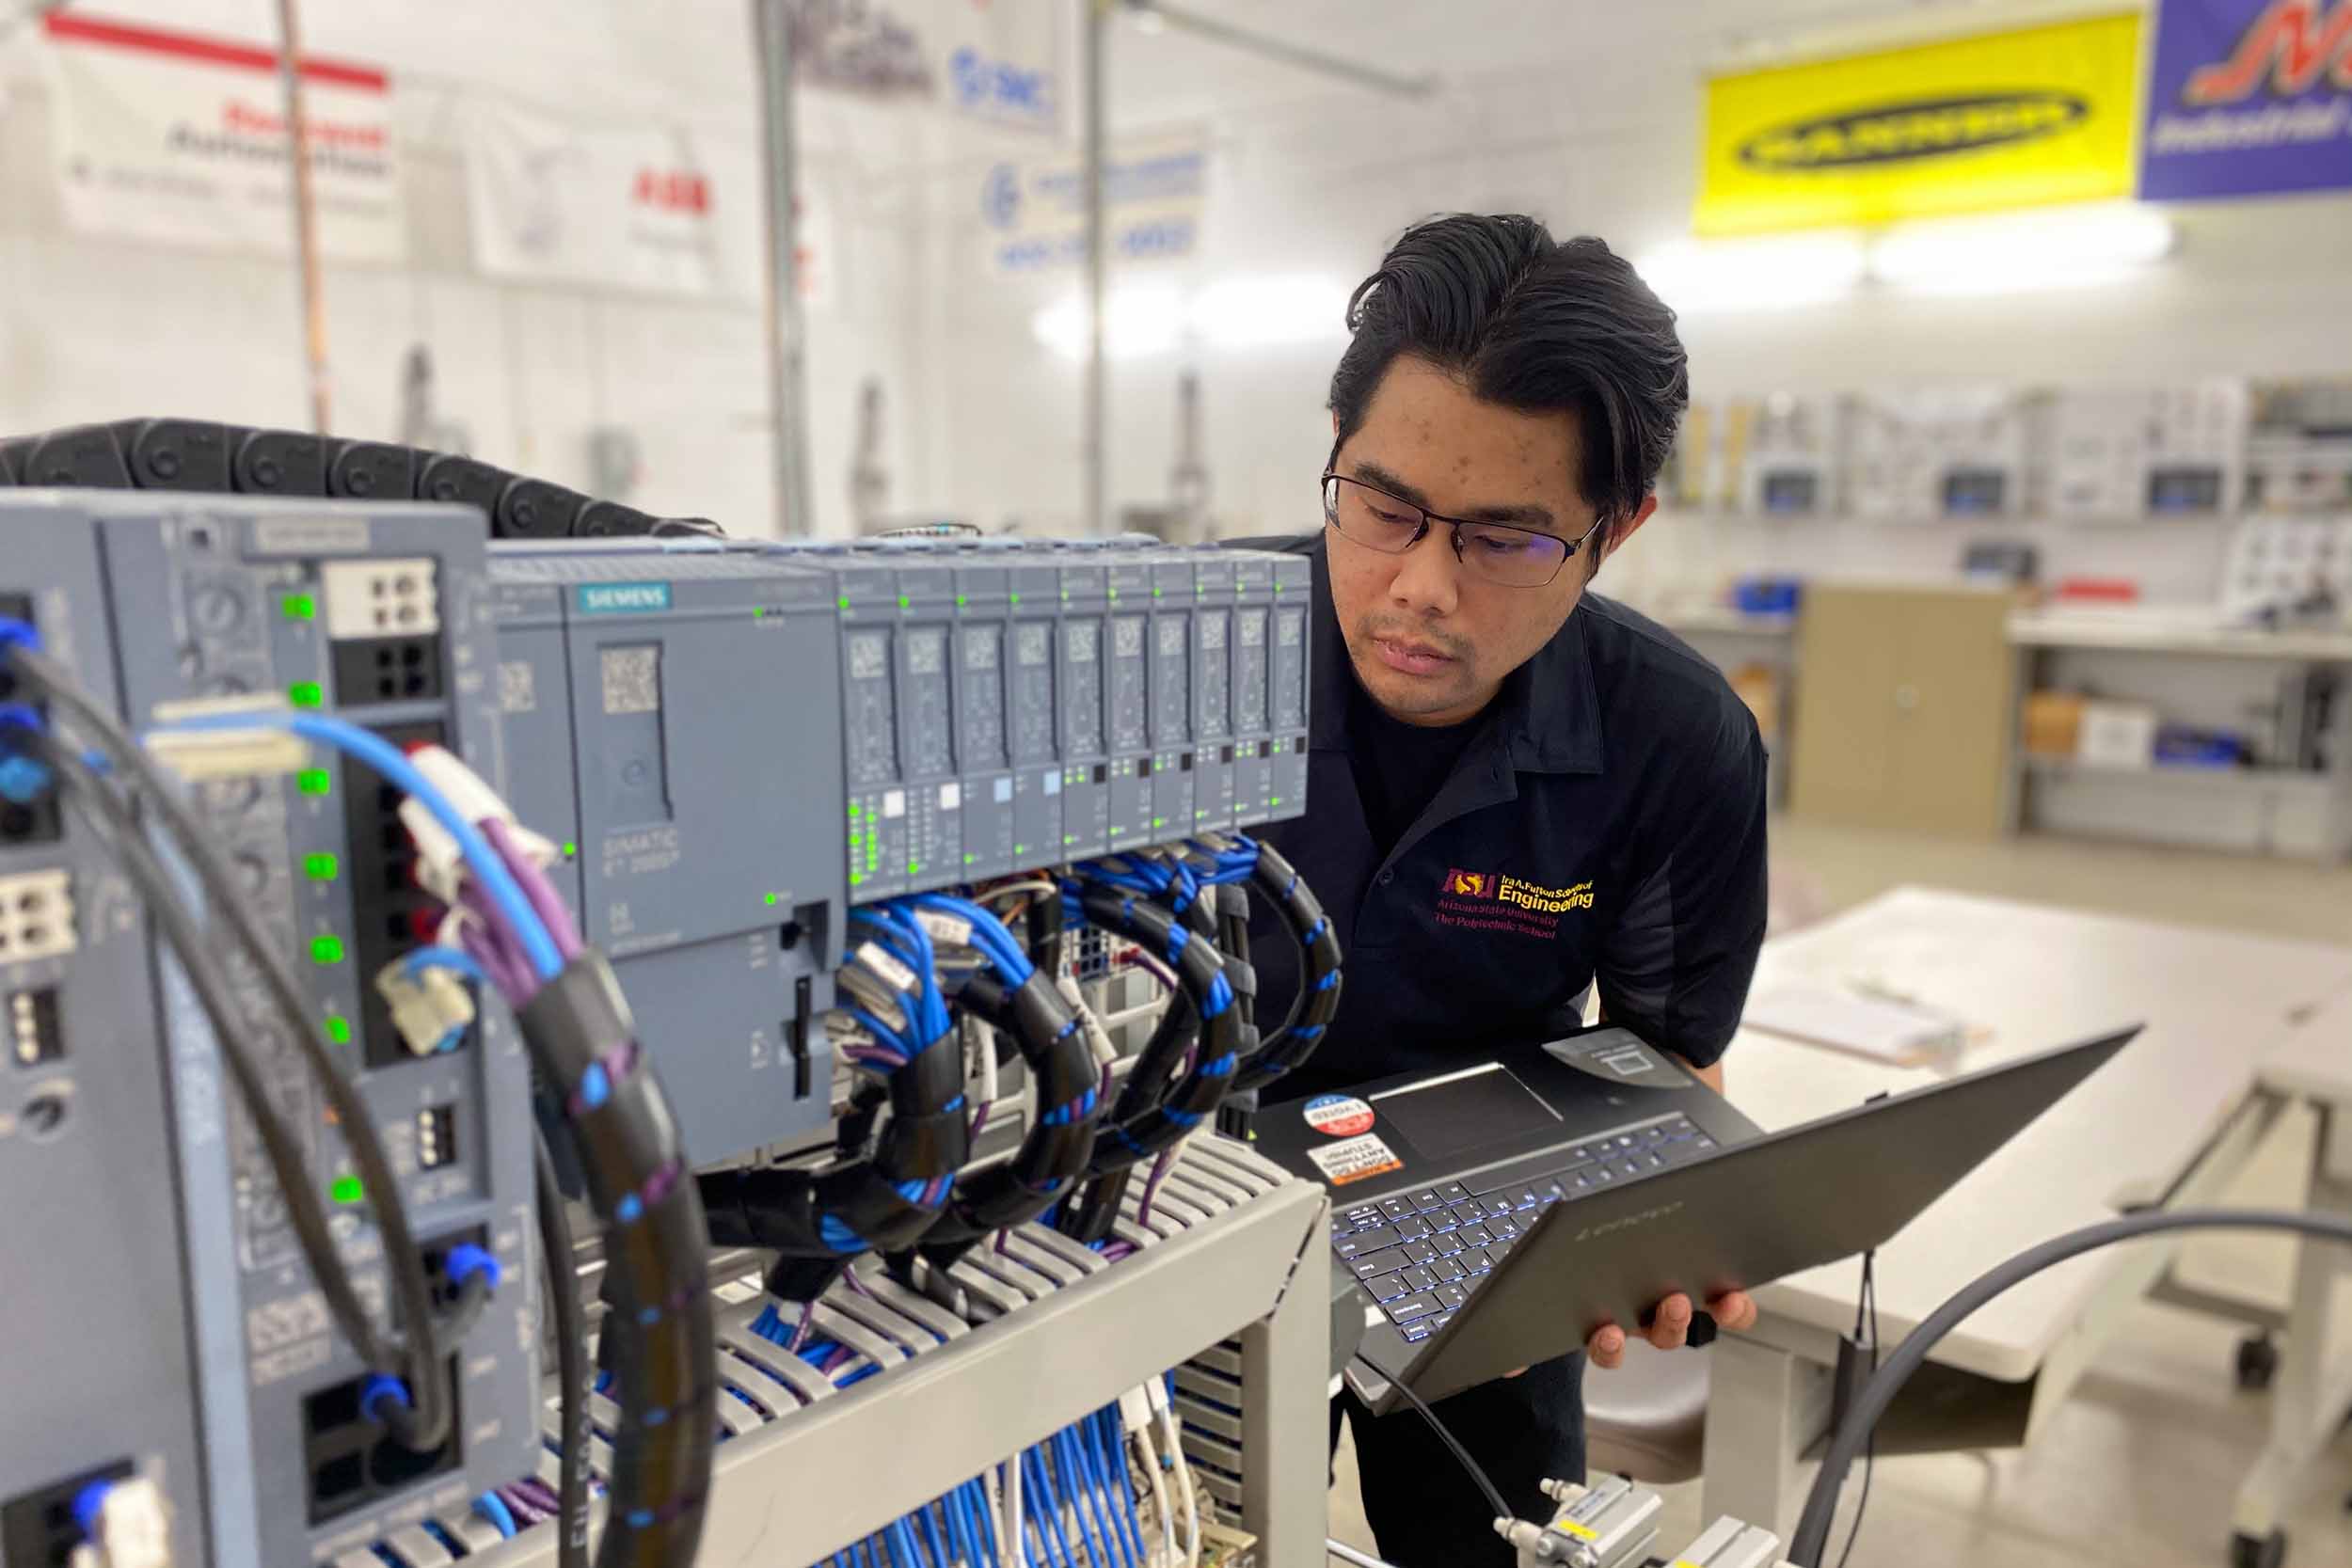 Engineering senior Jean-Francois Enriquez is using Siemens hardware to operate a digital twin machine as part of his senior design capstone project.